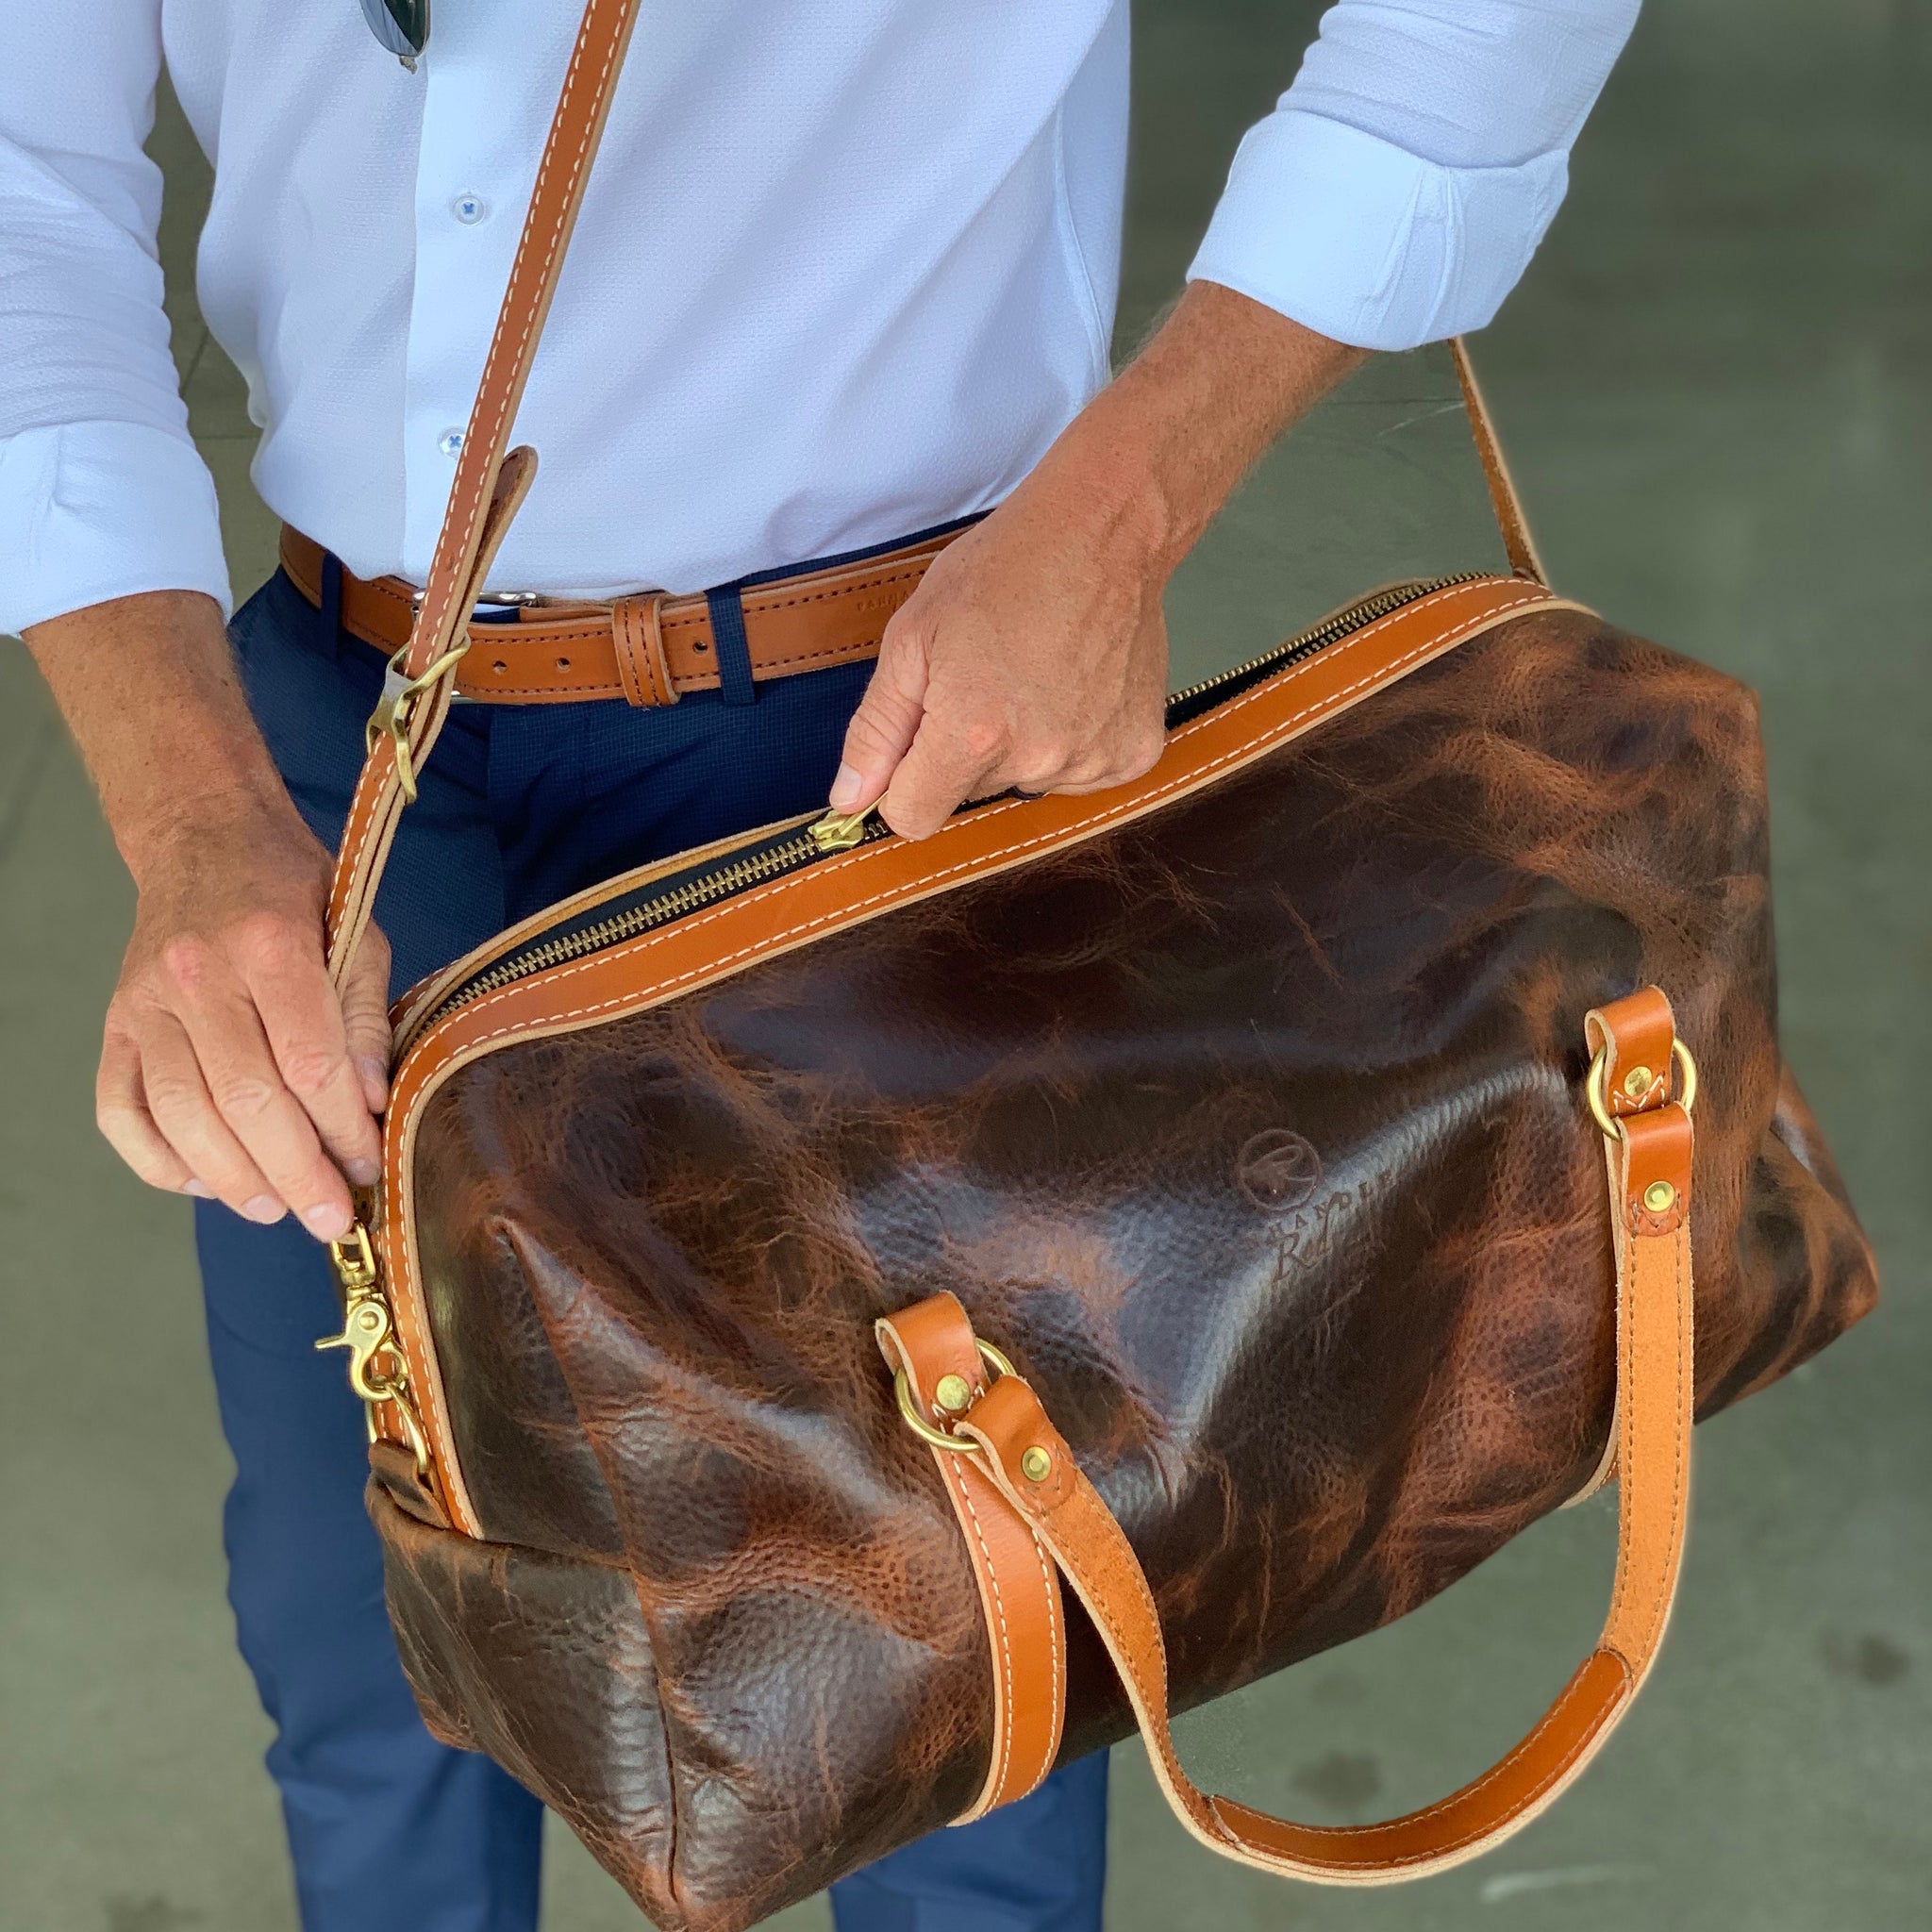 Panhandle Red Company specializing in Leather Goods, Handbags, Totes, Purses, Everyday Carry Needs, and more. Full-grain leather items, custom gifts, all Handcrafted in Idaho, USA.